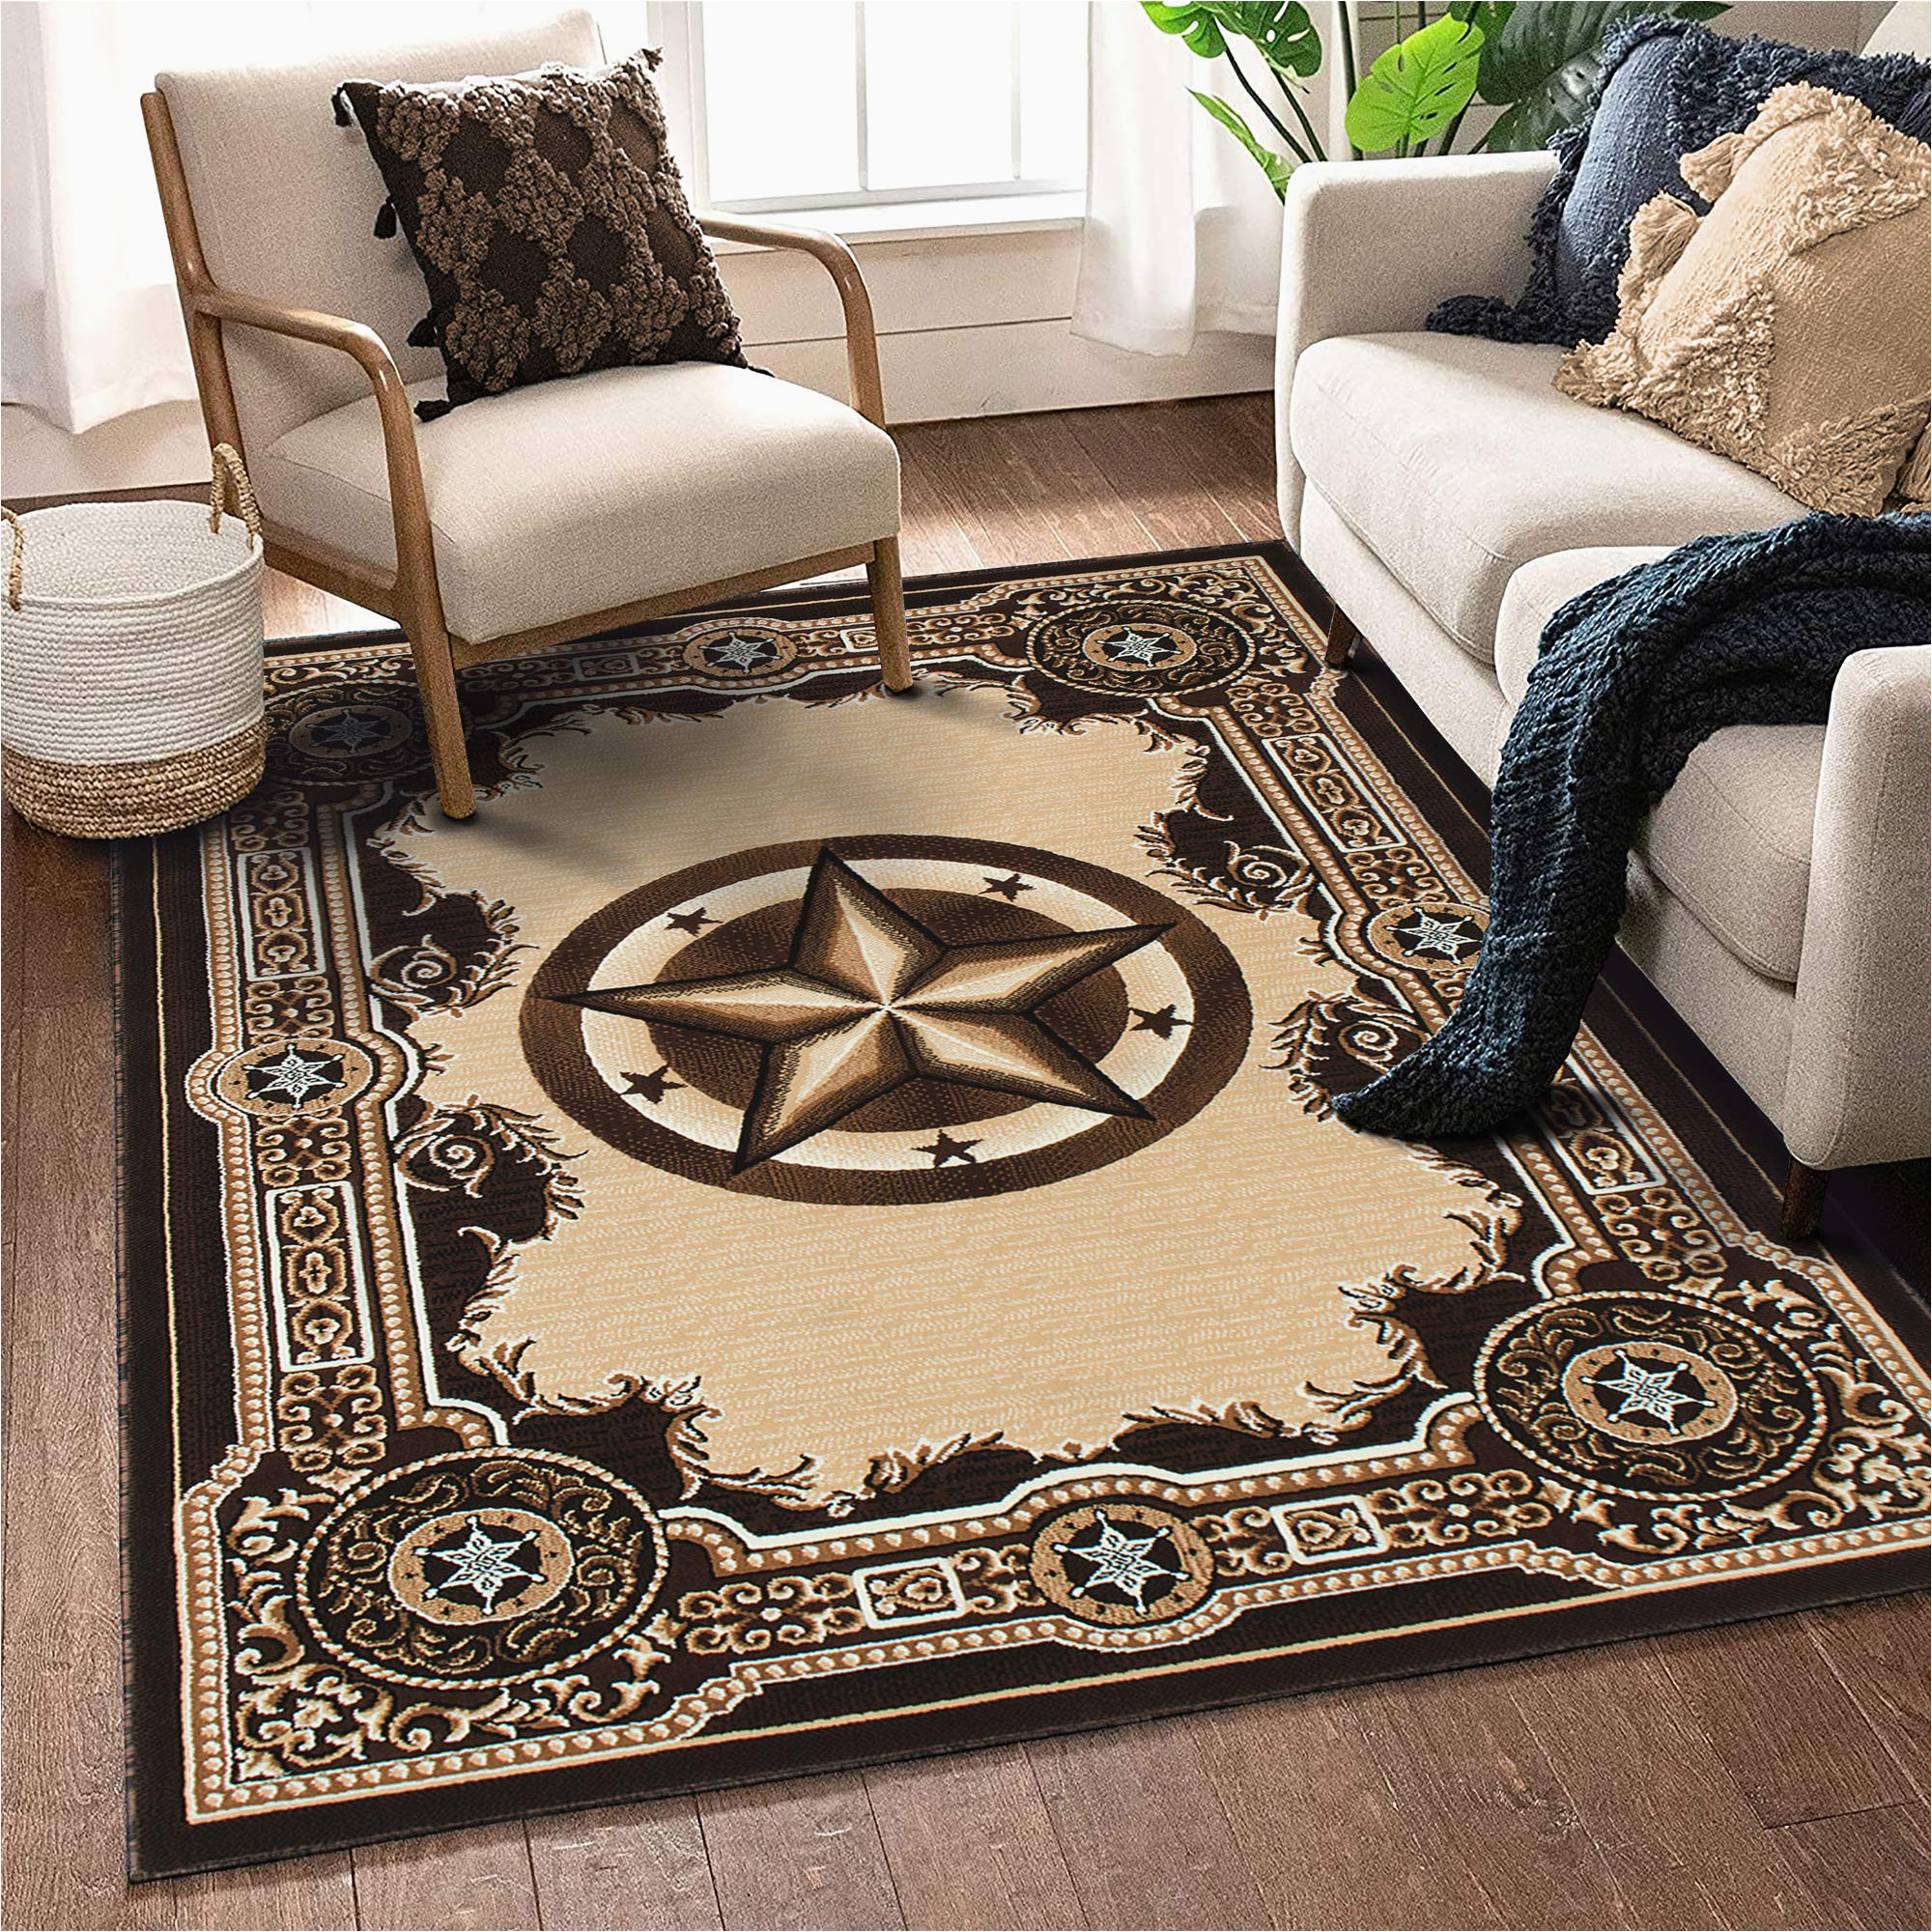 Western themed area Rugs for Sale Amazon.com: Allstar 5×7 Traditional Accent Rug In Berber with …